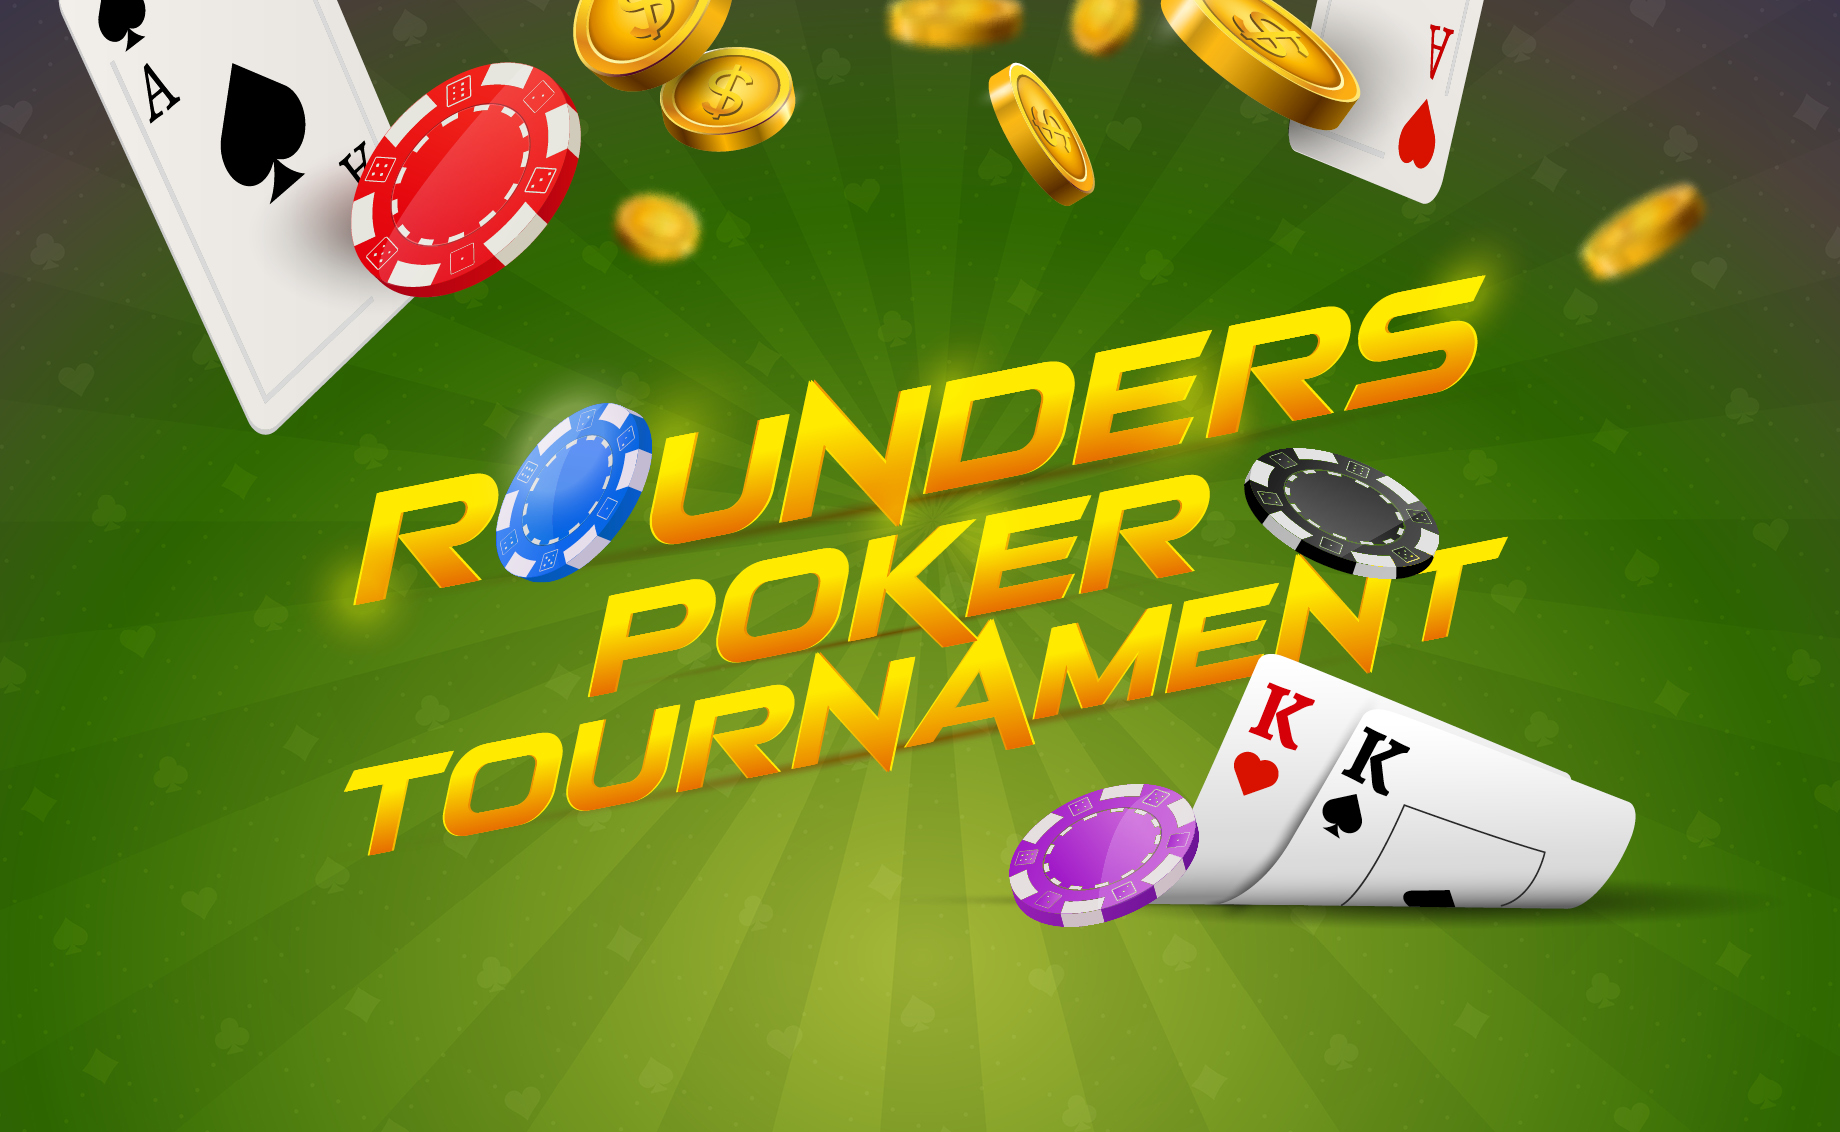 rounders meaning poker